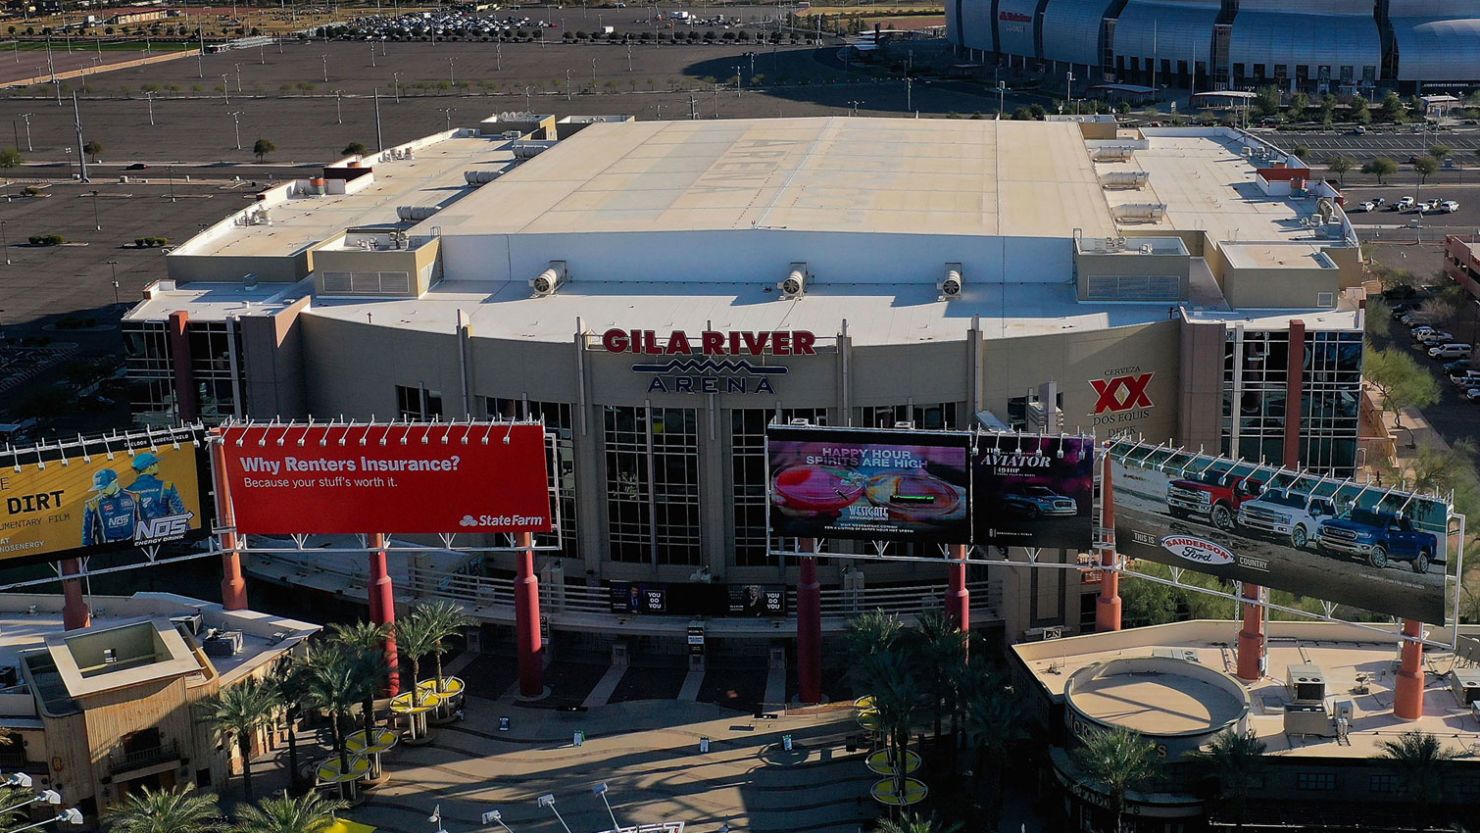 The NHL's Arizona Coyotes may not have access to Gila River Arena if bills are not paid, according to a city official.